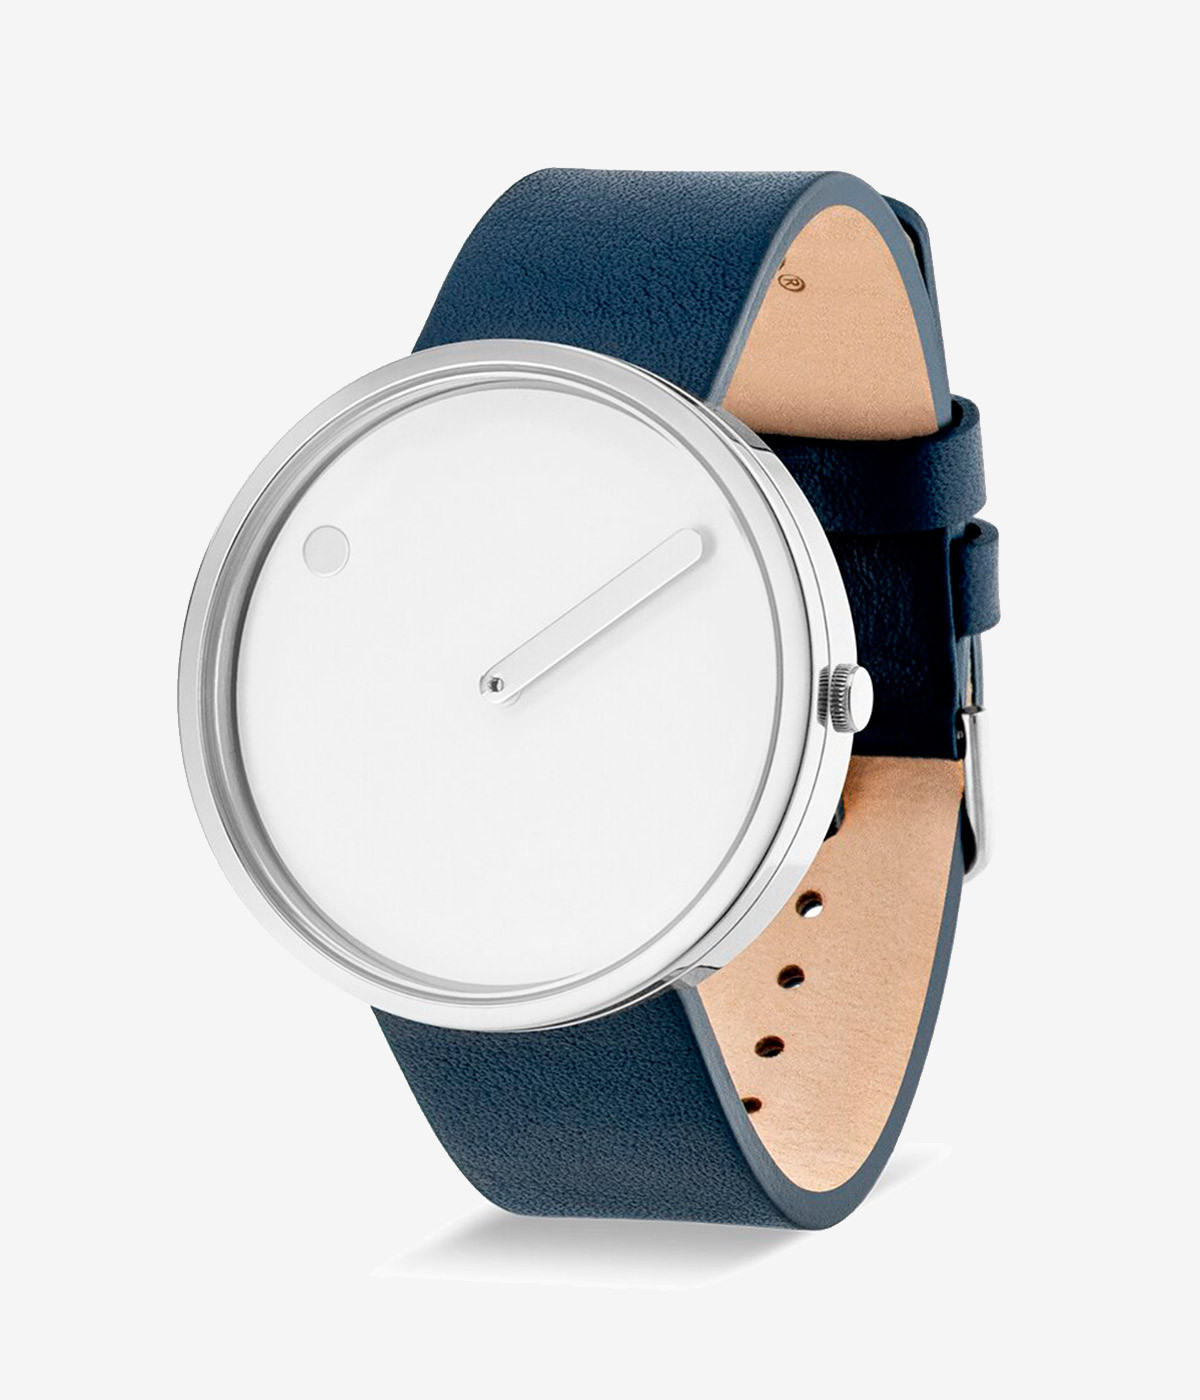 WHITE DIAL / NIGHT BLUE LEATHER STRAP 40 mm